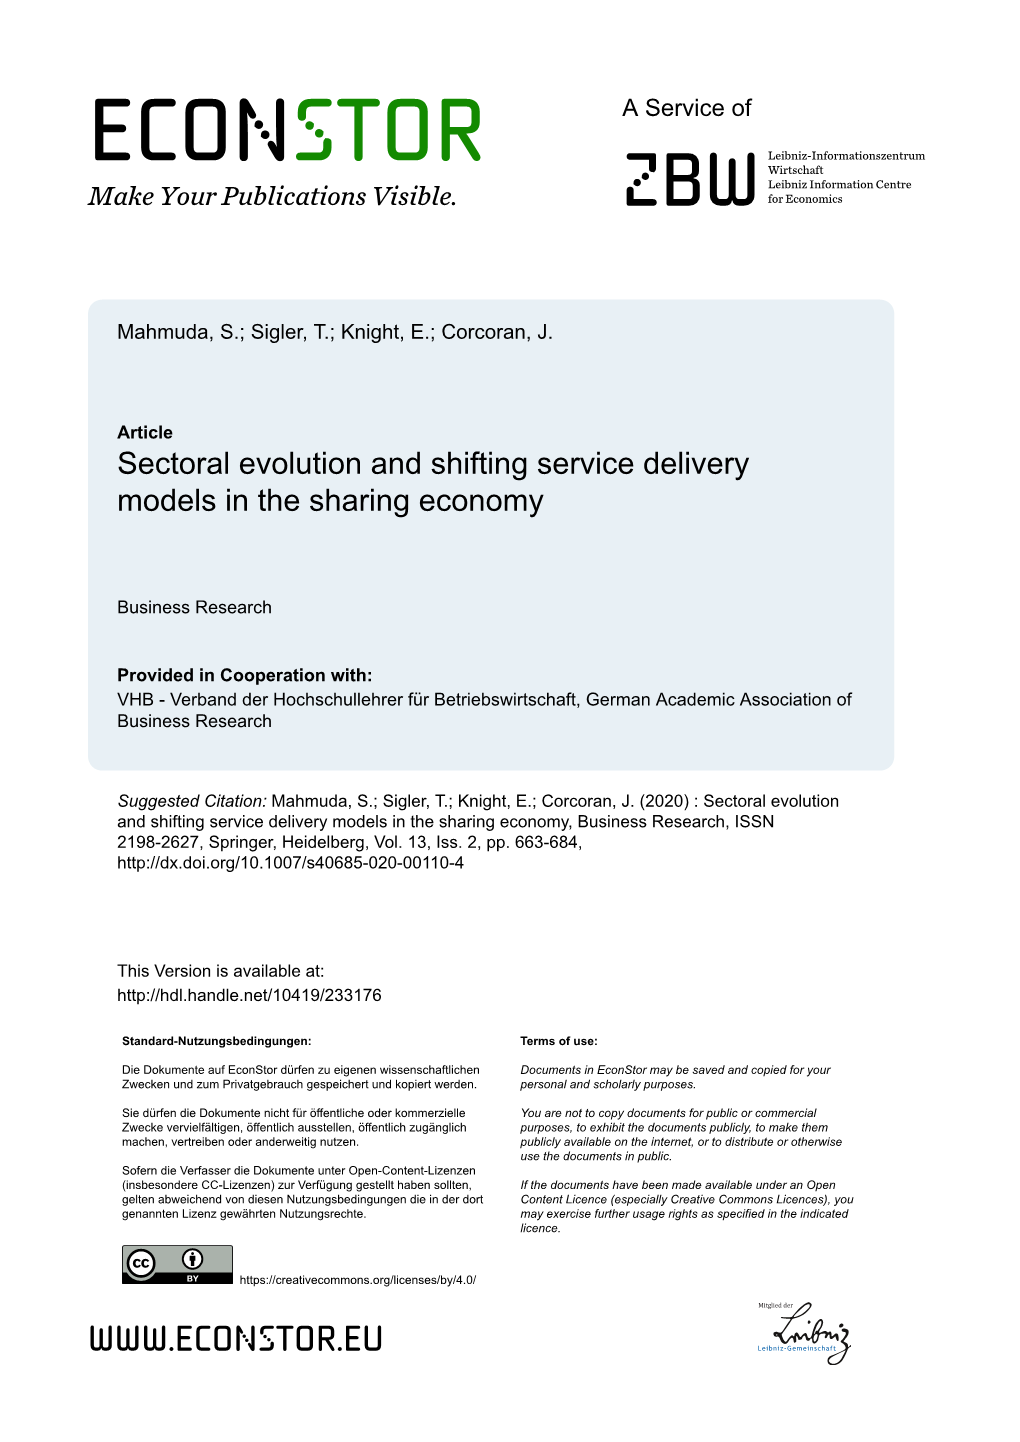 Sectoral Evolution and Shifting Service Delivery Models in the Sharing Economy